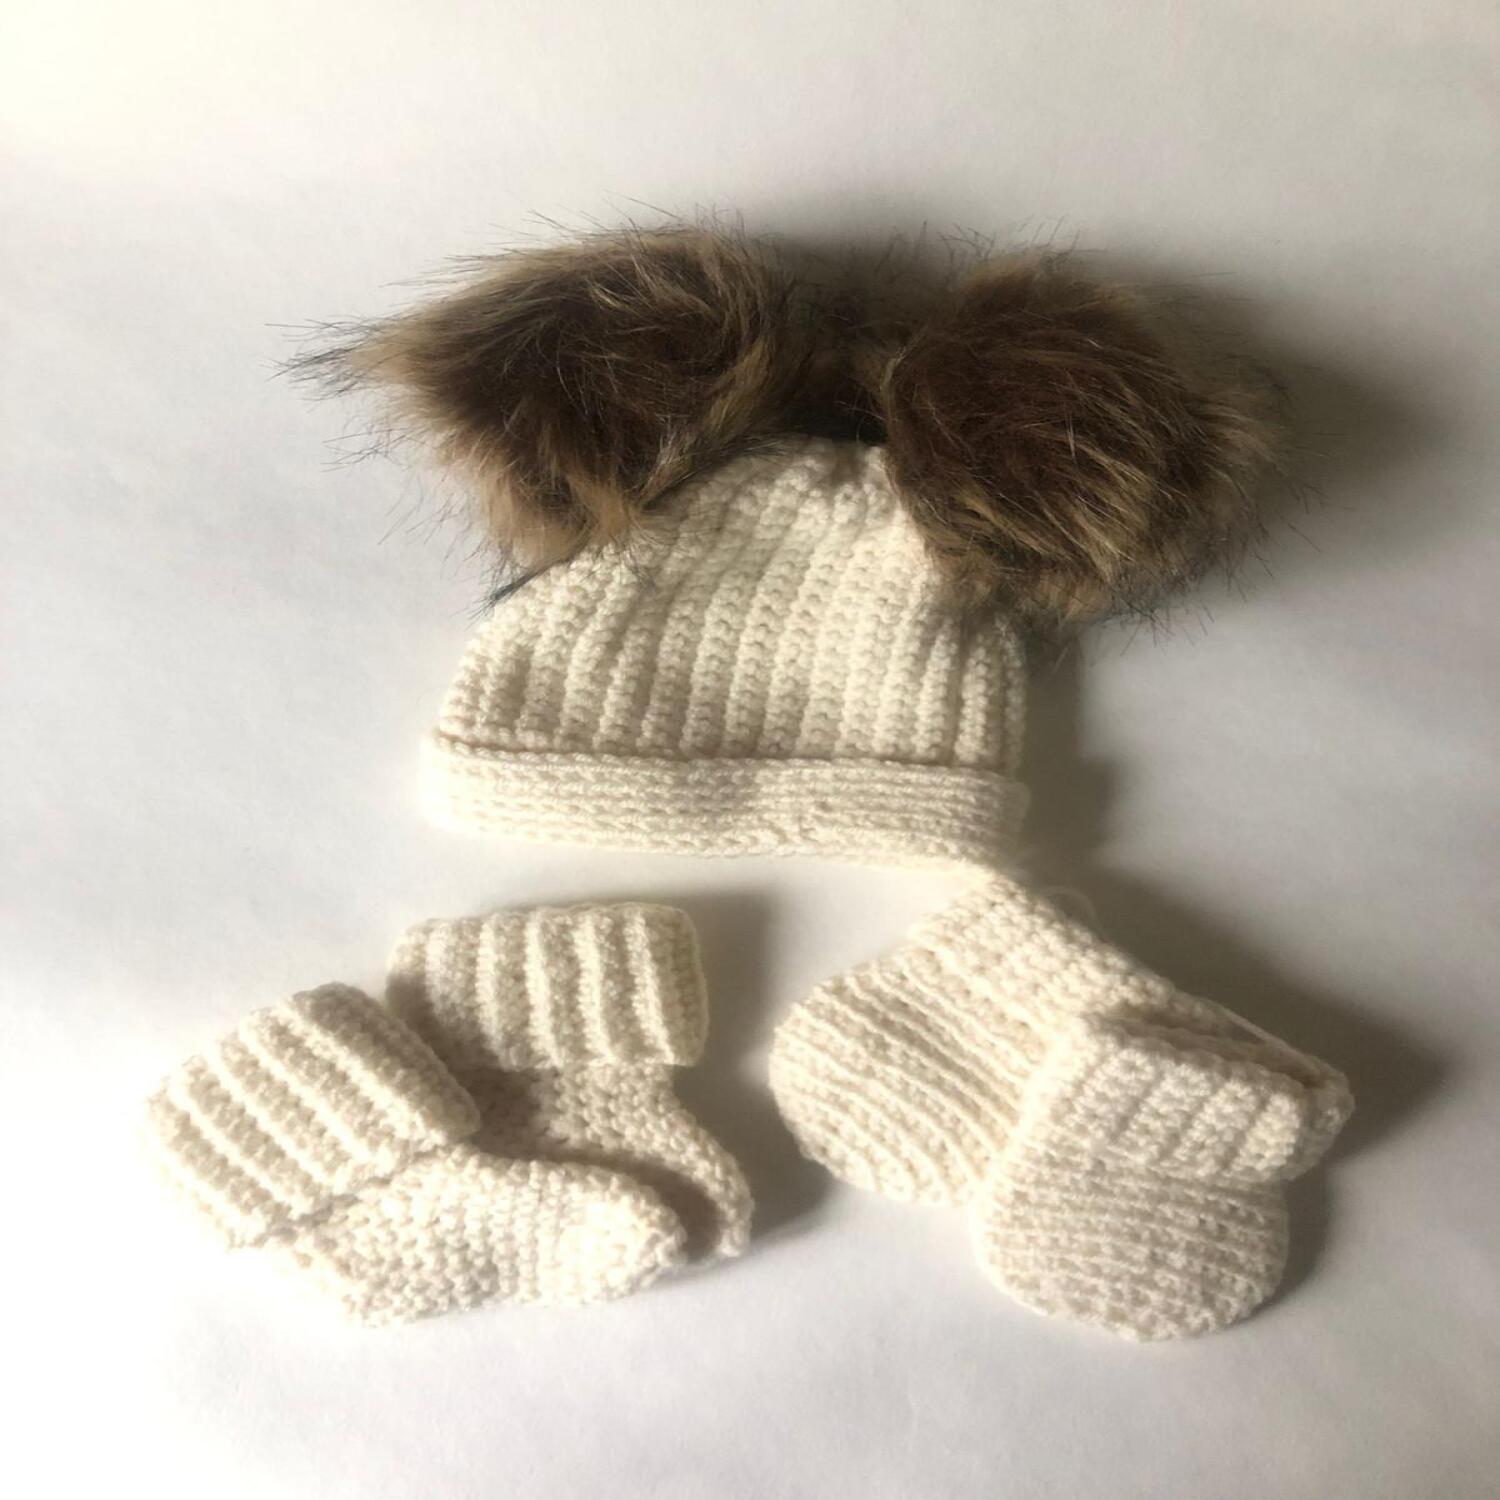 Yellow baby hat, mittens and socks set (tiny baby)